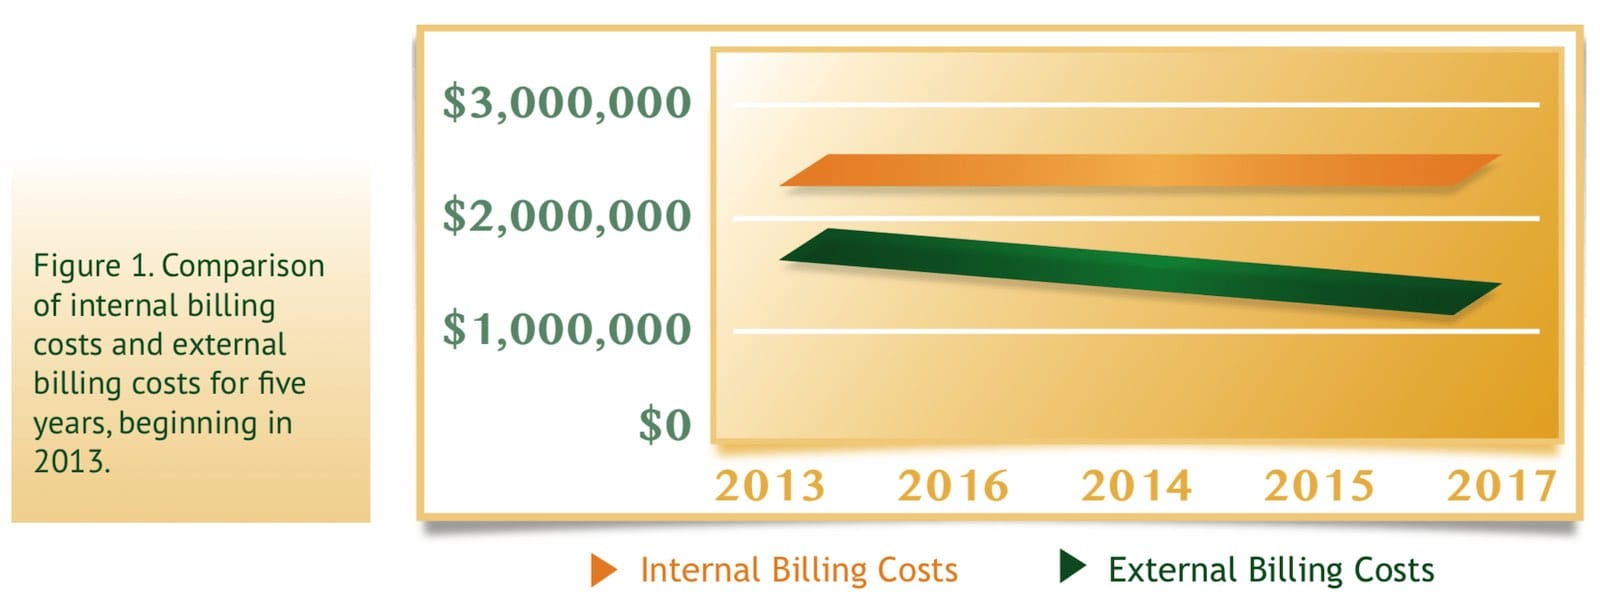 Comparison of internal billing costs and external billing costs for five years, beginning in 2013.